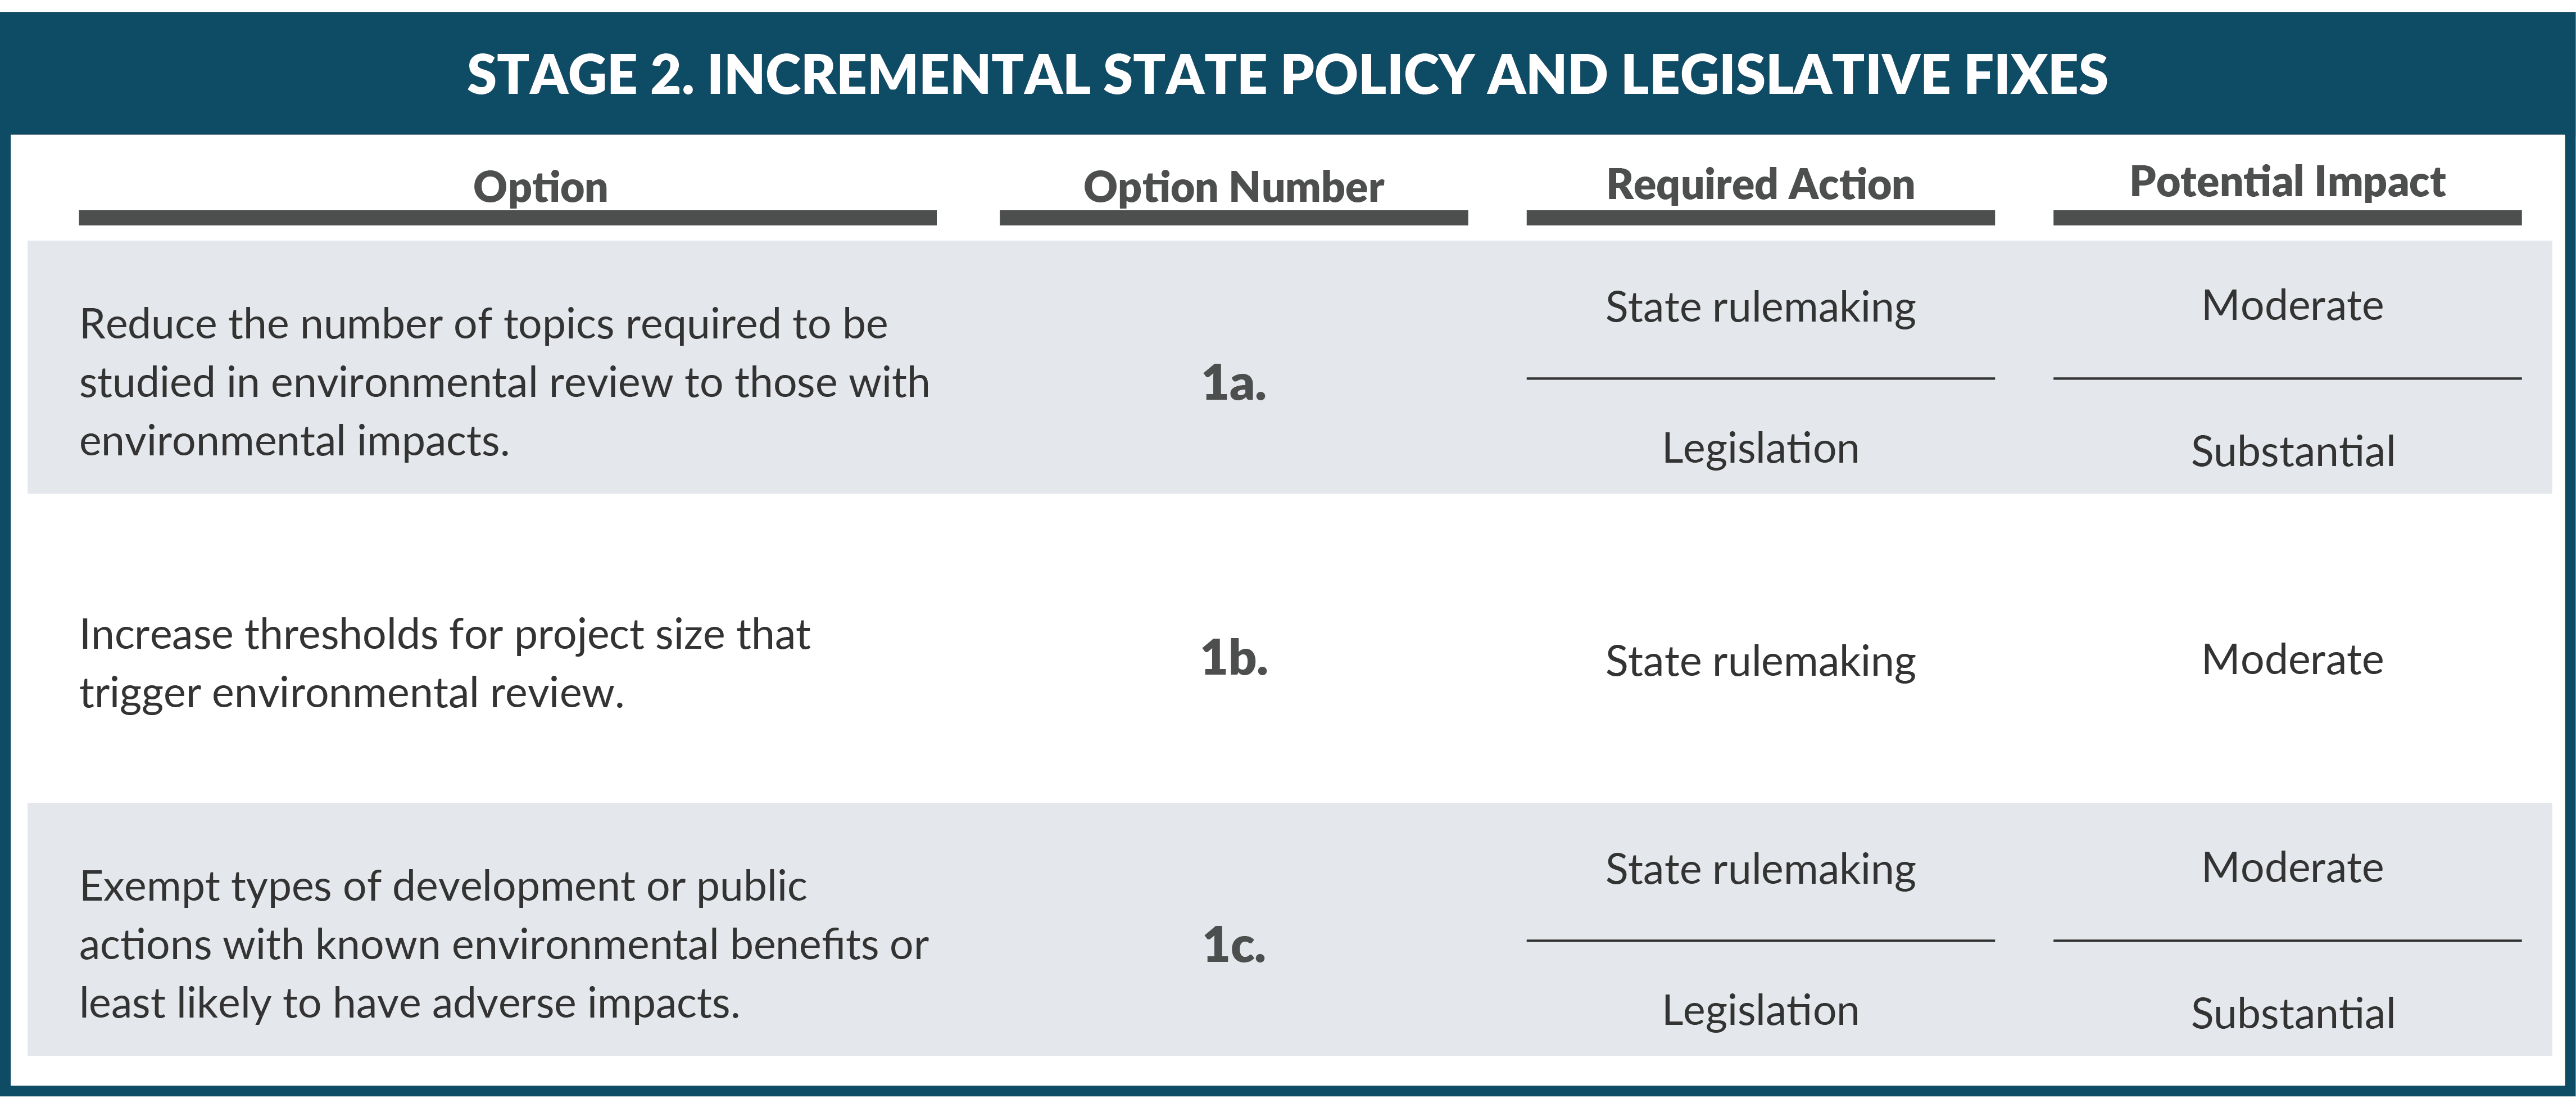 Stage 2. Incremental State Policy and Legislative Fixes